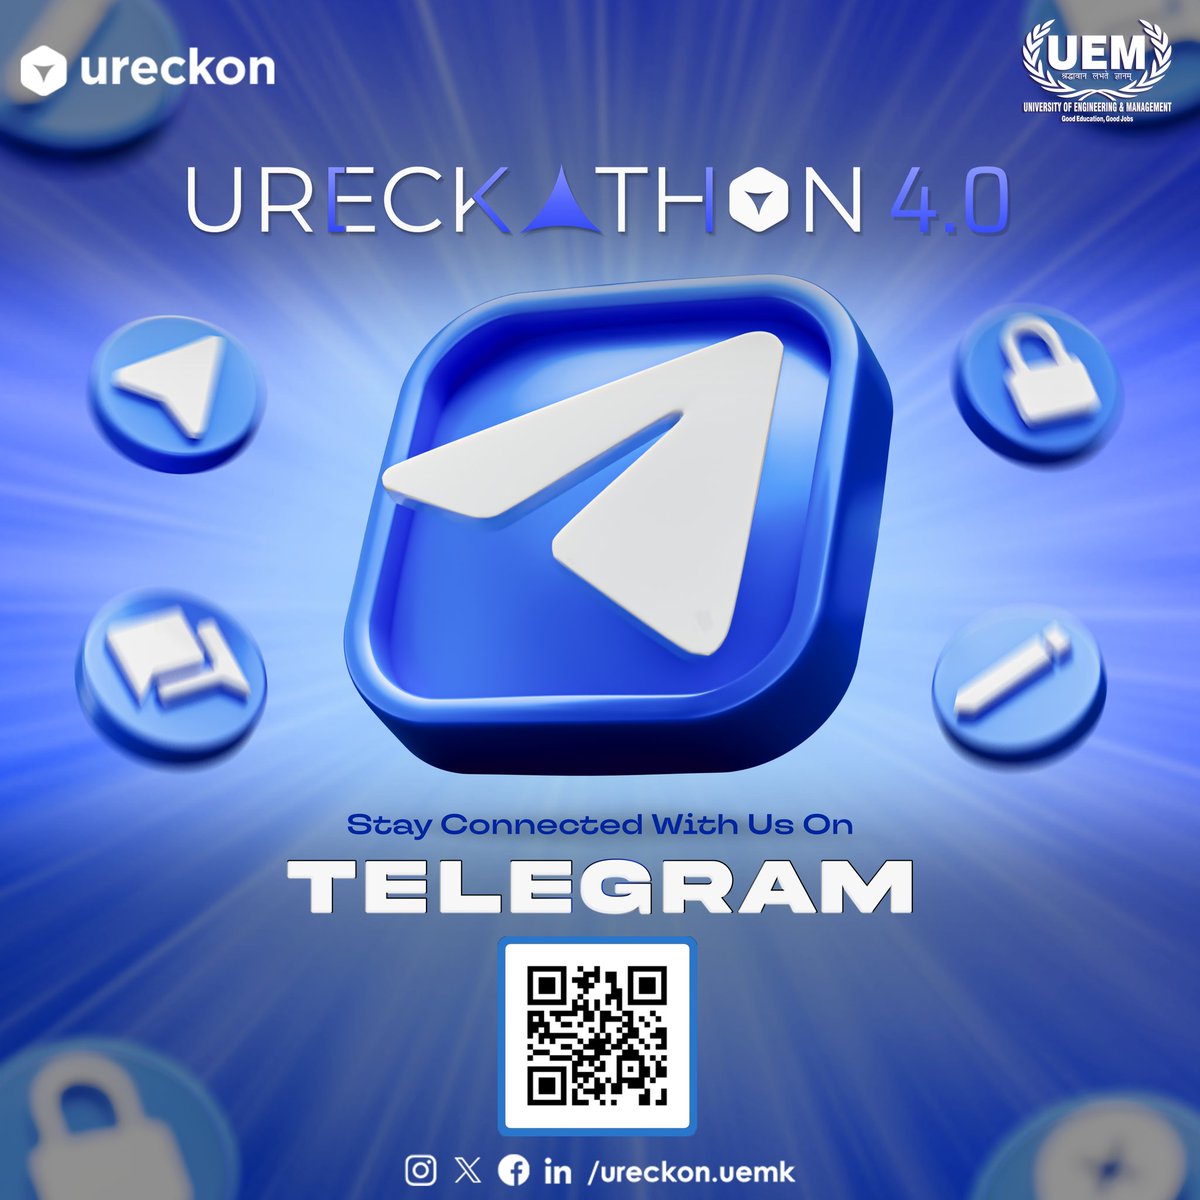 Join our telegram channel to keep yourself infomed about the latest updates. Participate in the Ureckathon, an engaging 48-hour coding challenge hosted by Team URECKON! #URECKATHON #hackathon #ureckon #uemkolkata